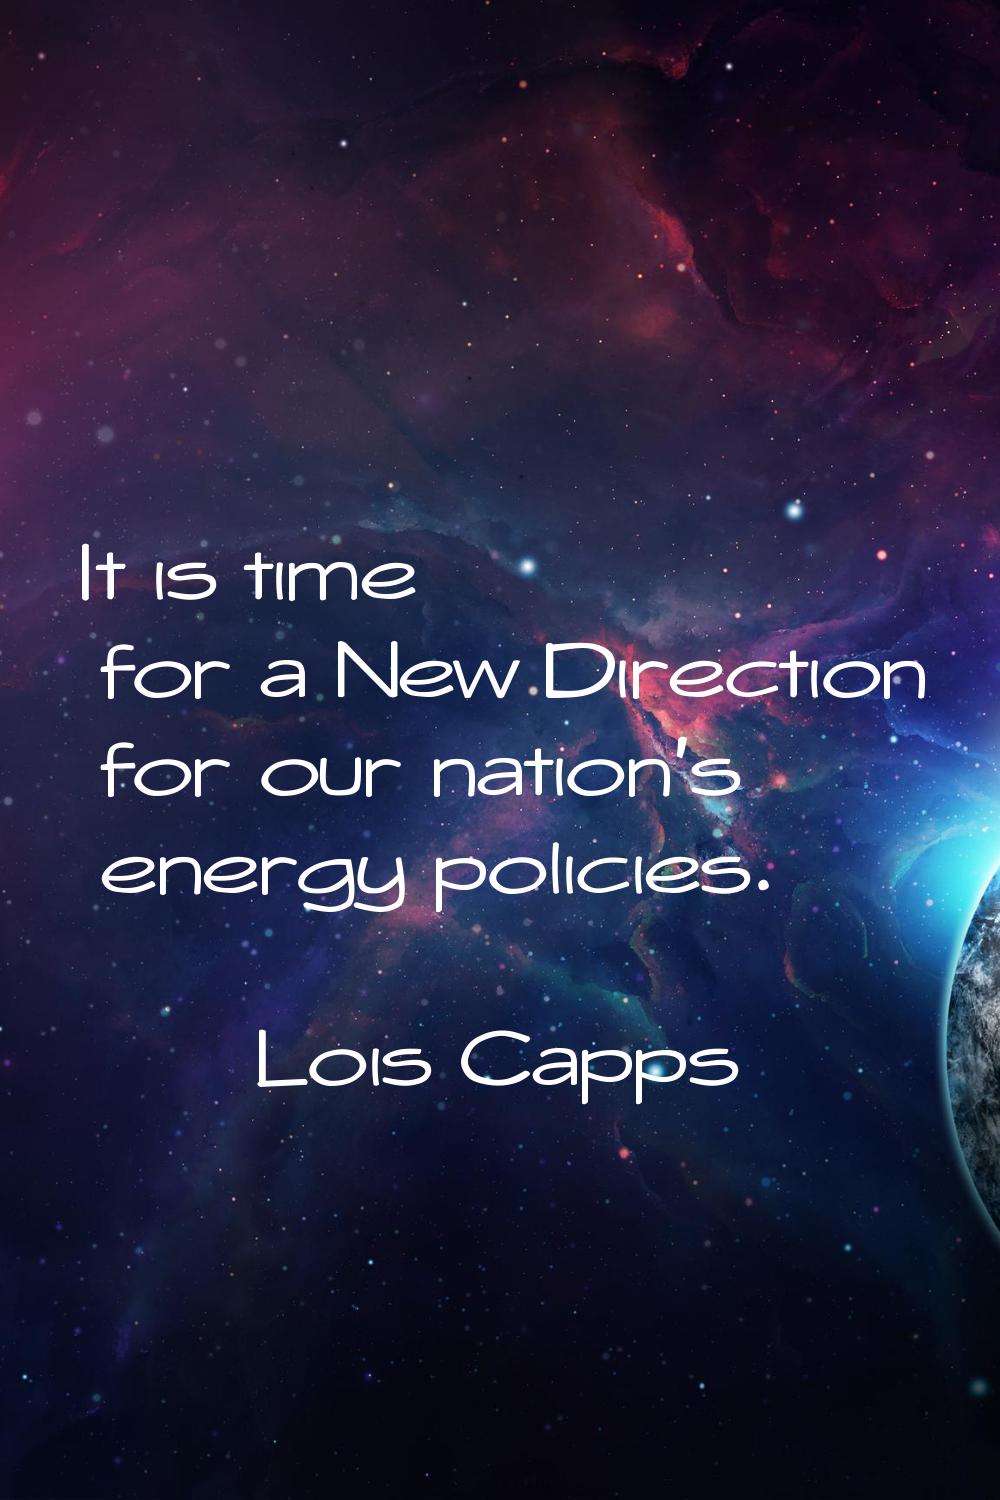 It is time for a New Direction for our nation's energy policies.